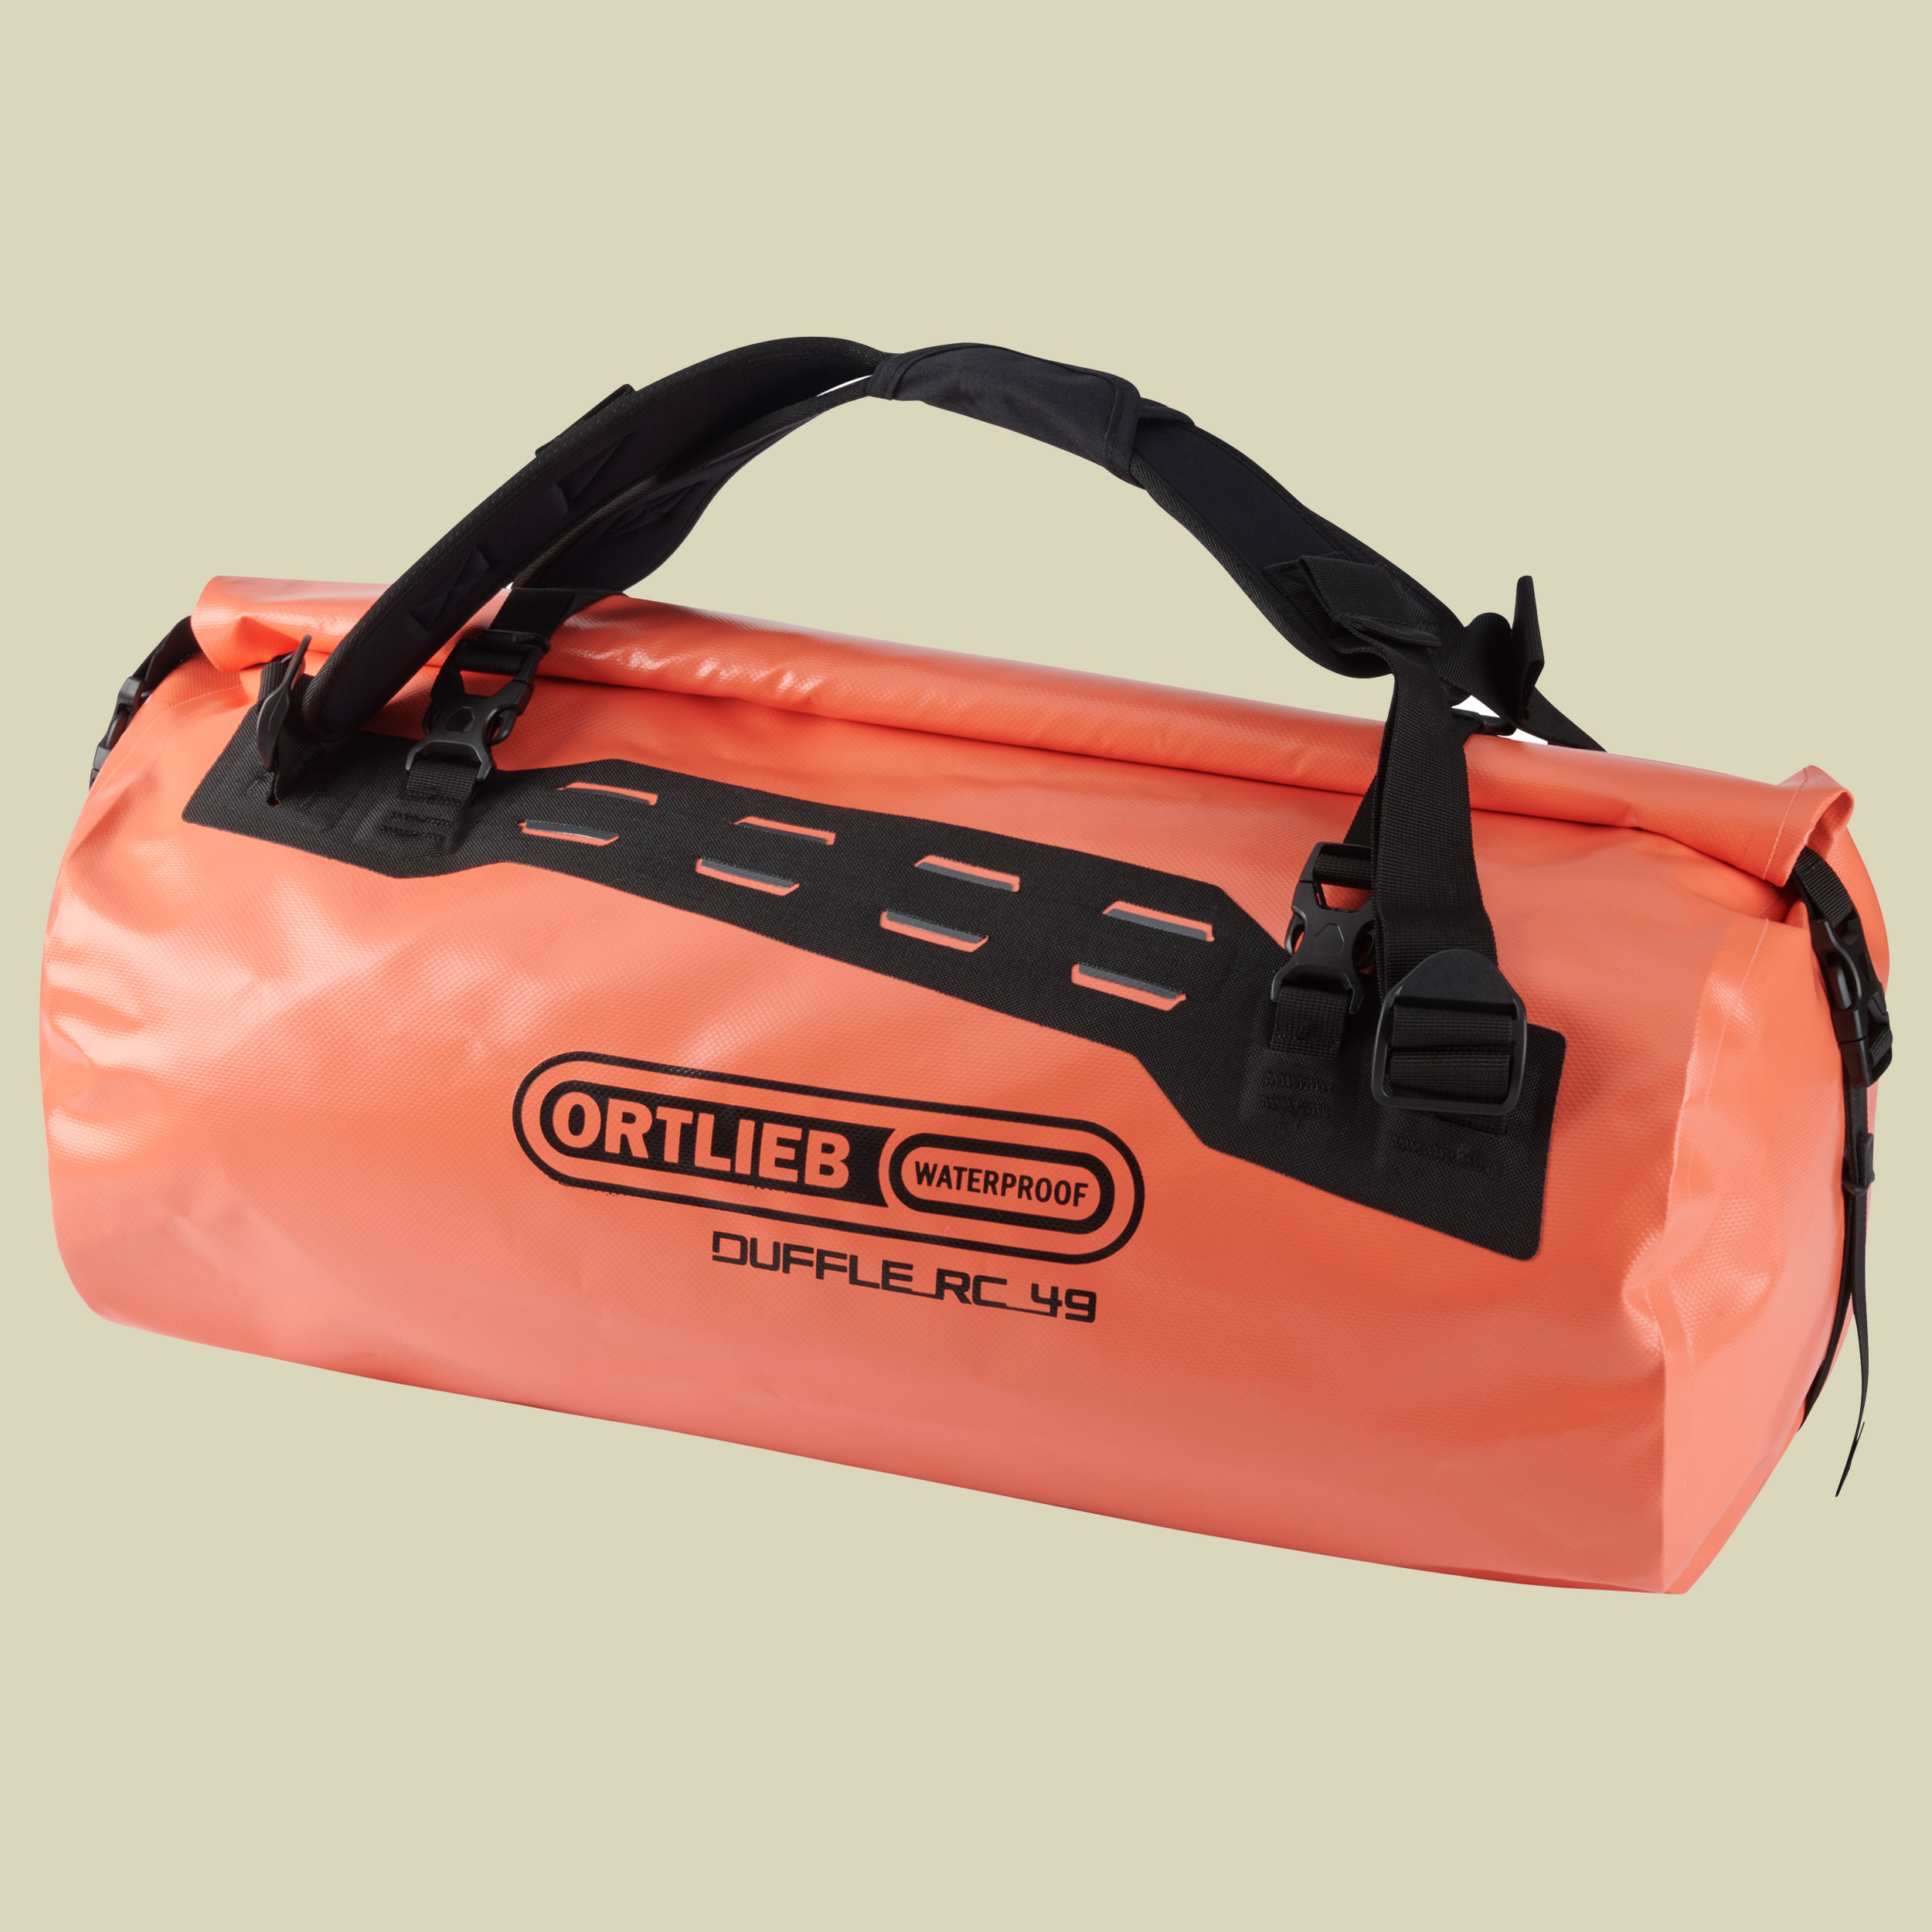 Duffle RC 49 rot - coral